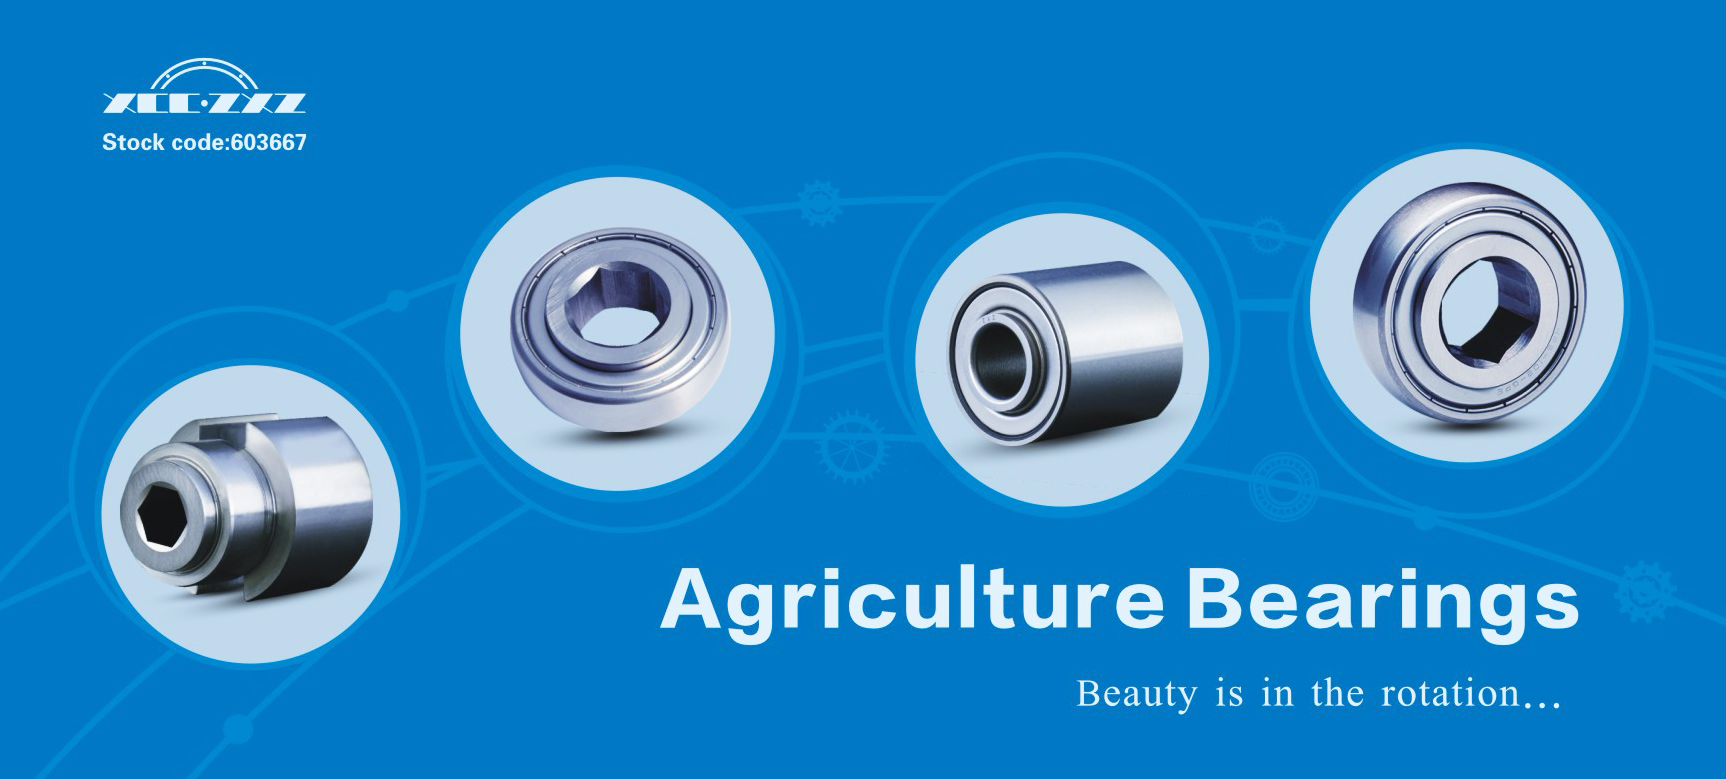 agriculture bearings